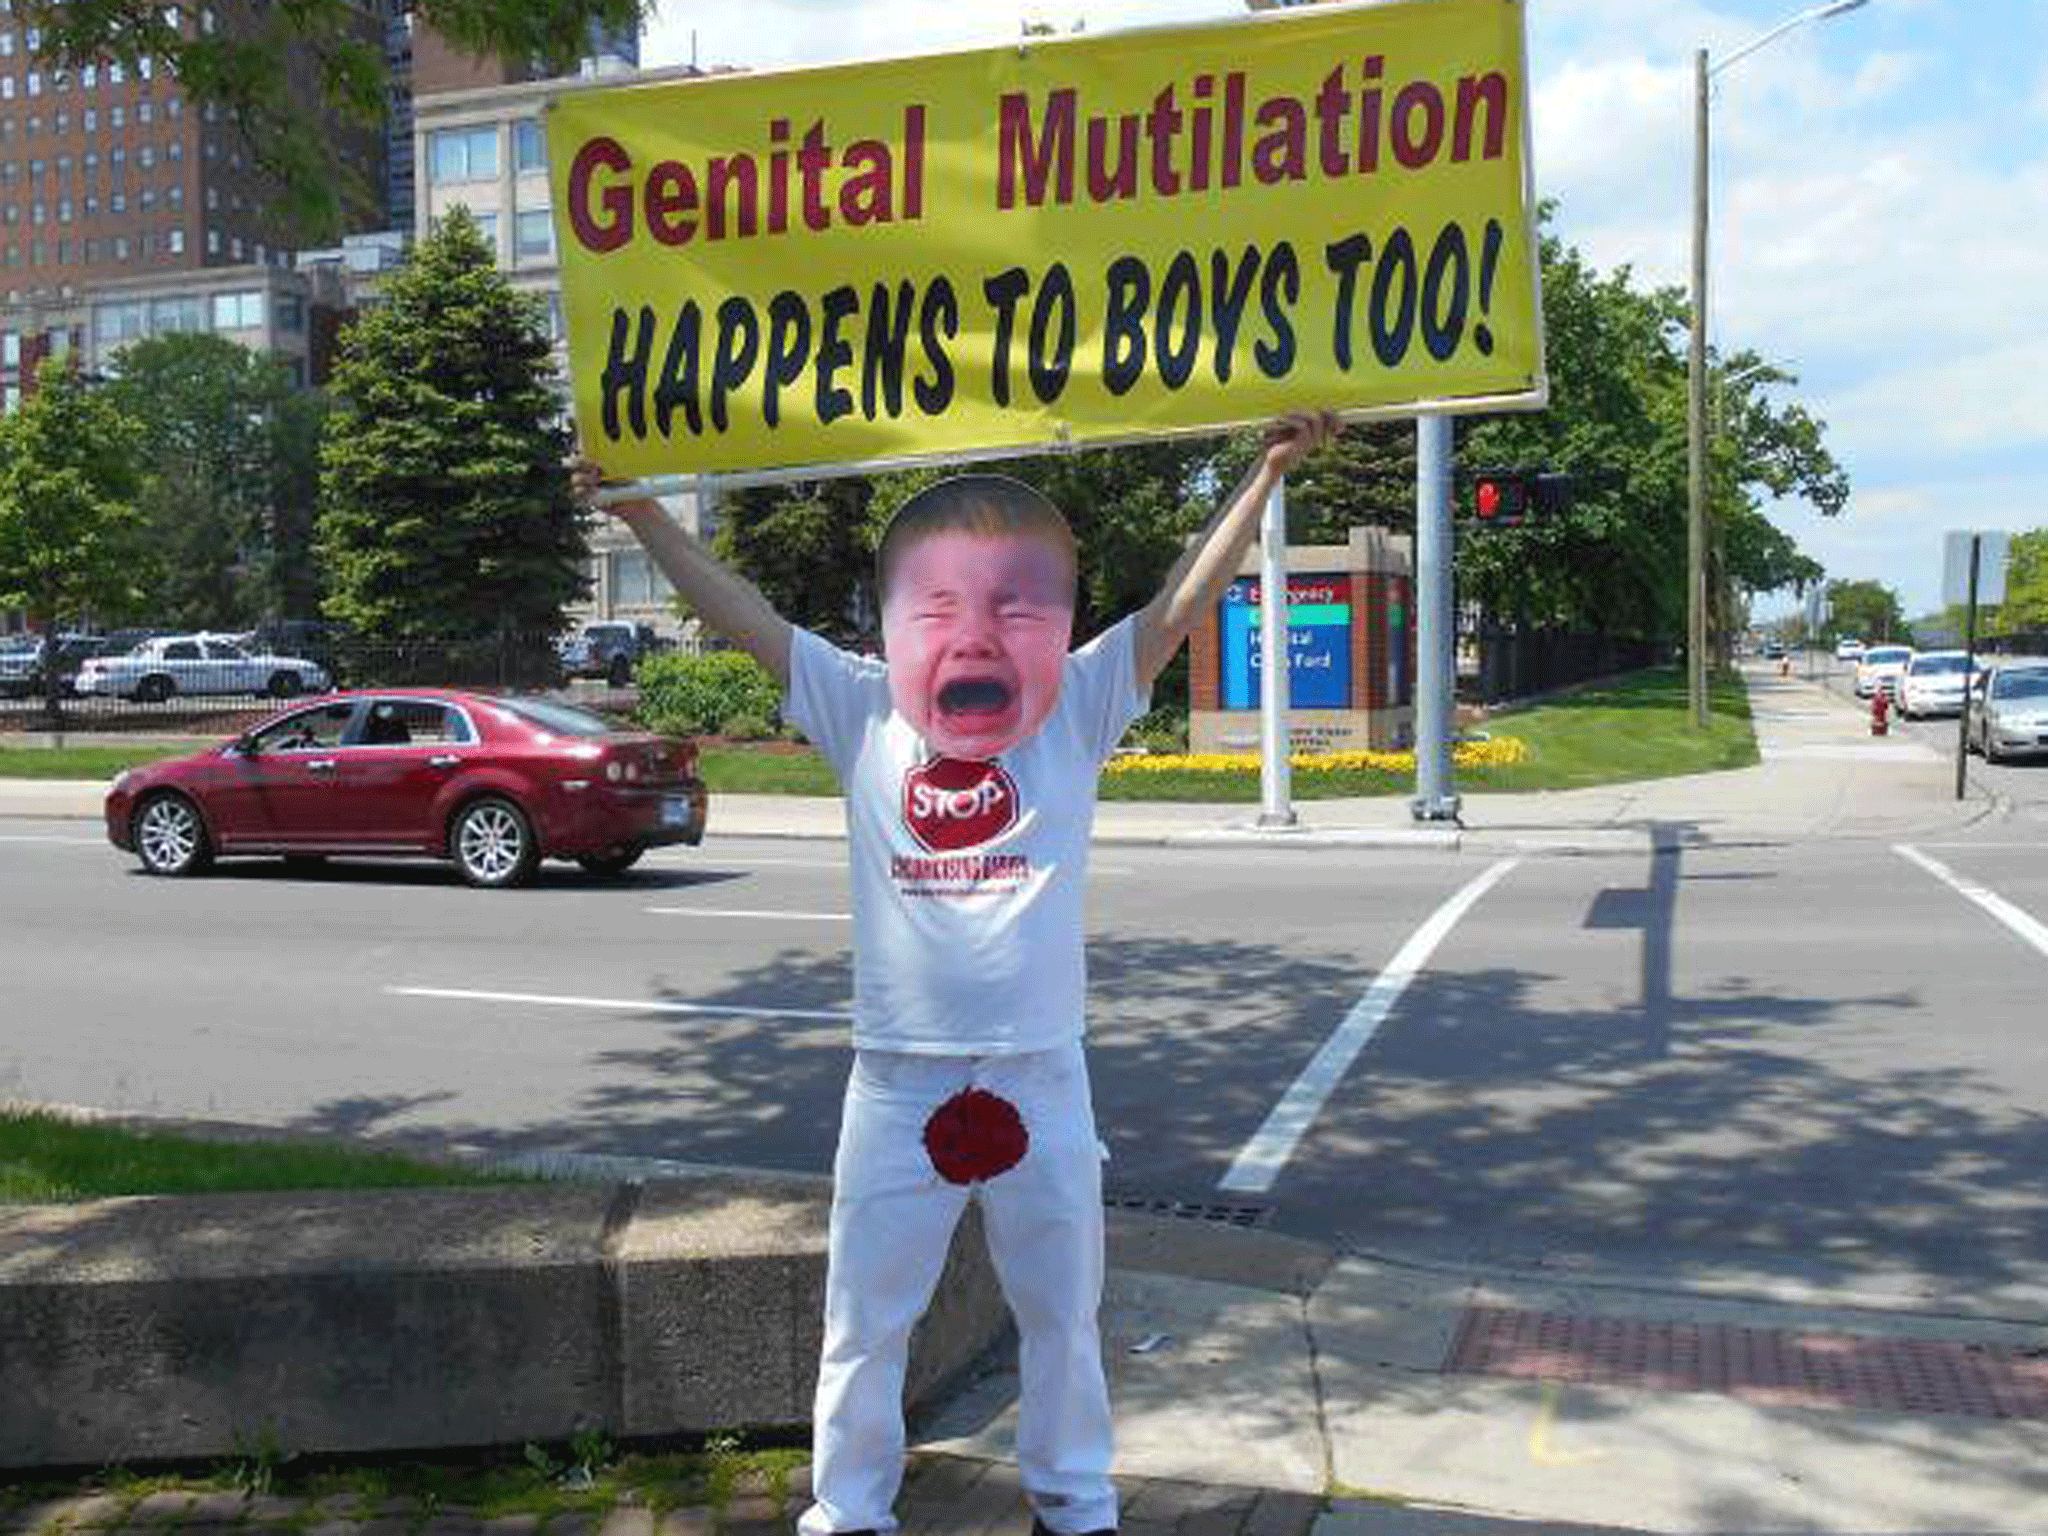 Protesters called for ending male circumcision